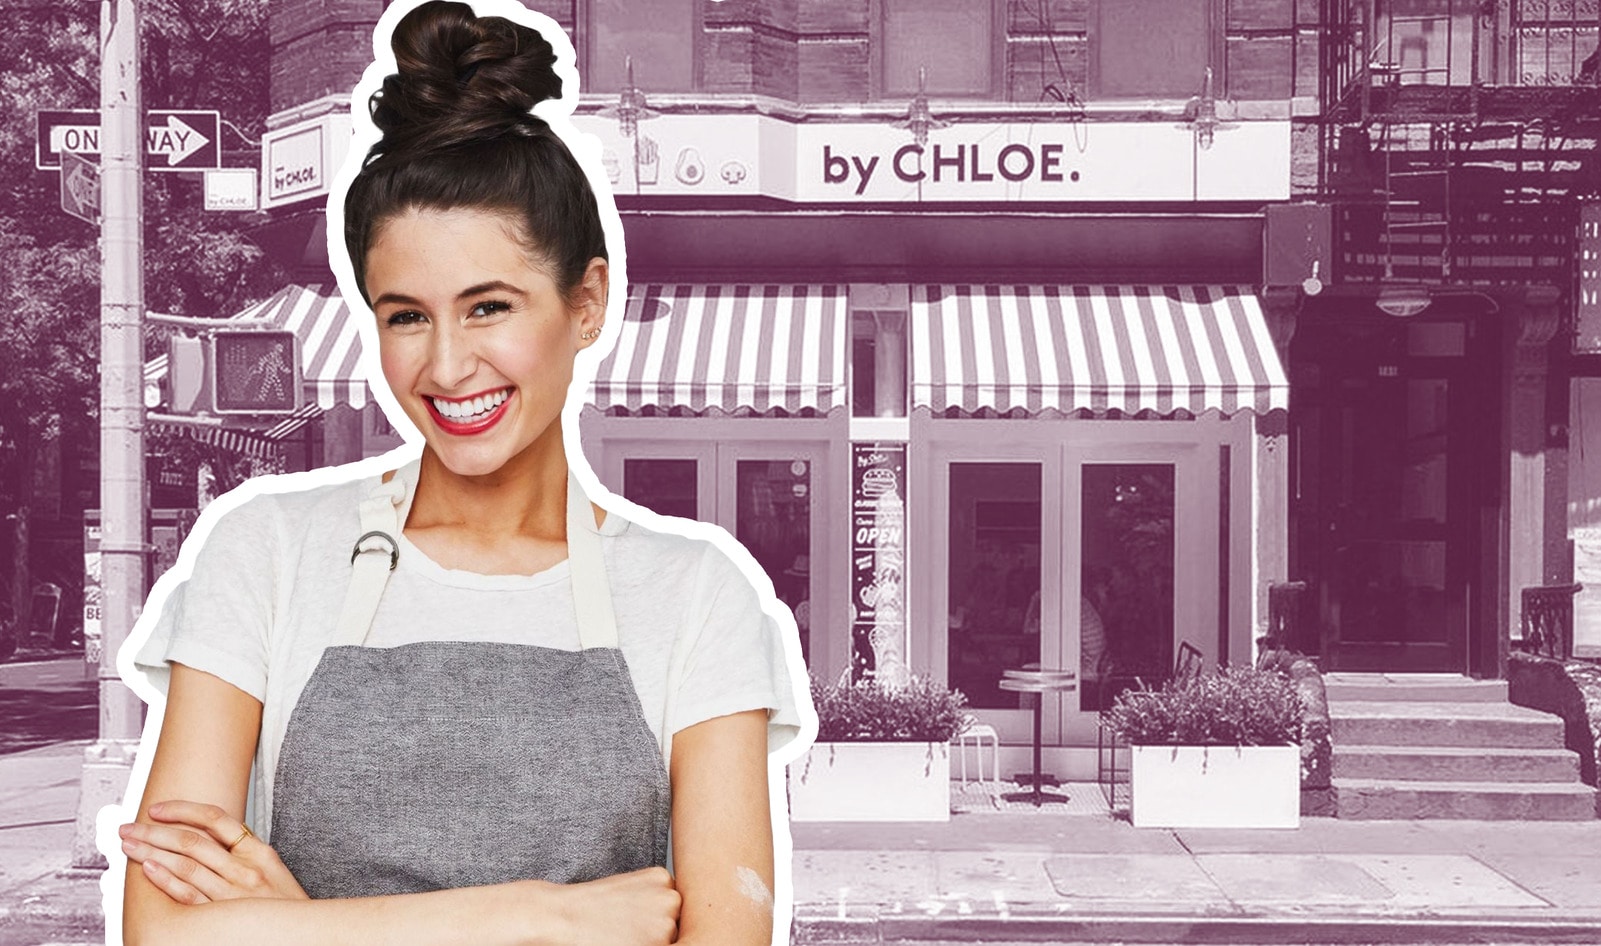 Vegan Chef Chloe Coscarelli Continues to Fight for the By CHLOE Brand